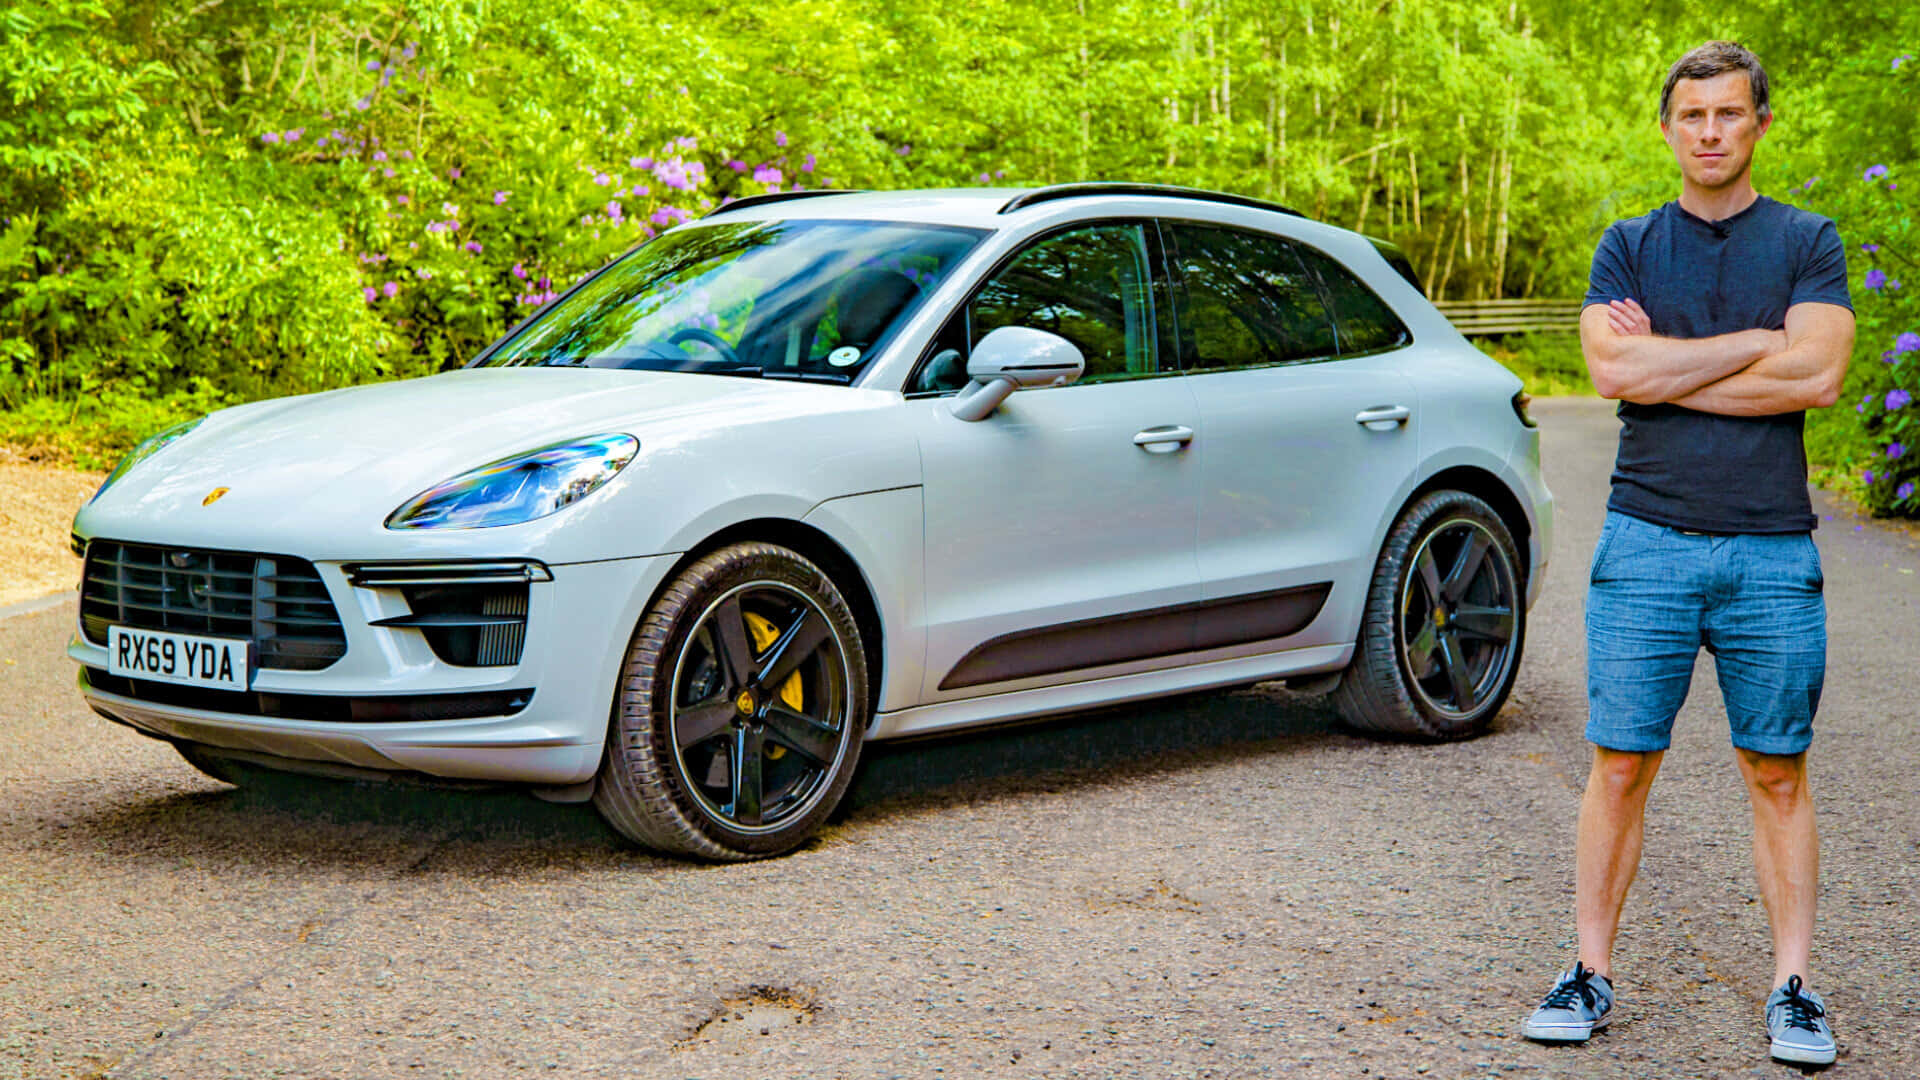 Stylish And Sleek - The New Porsche Macan In Action Wallpaper